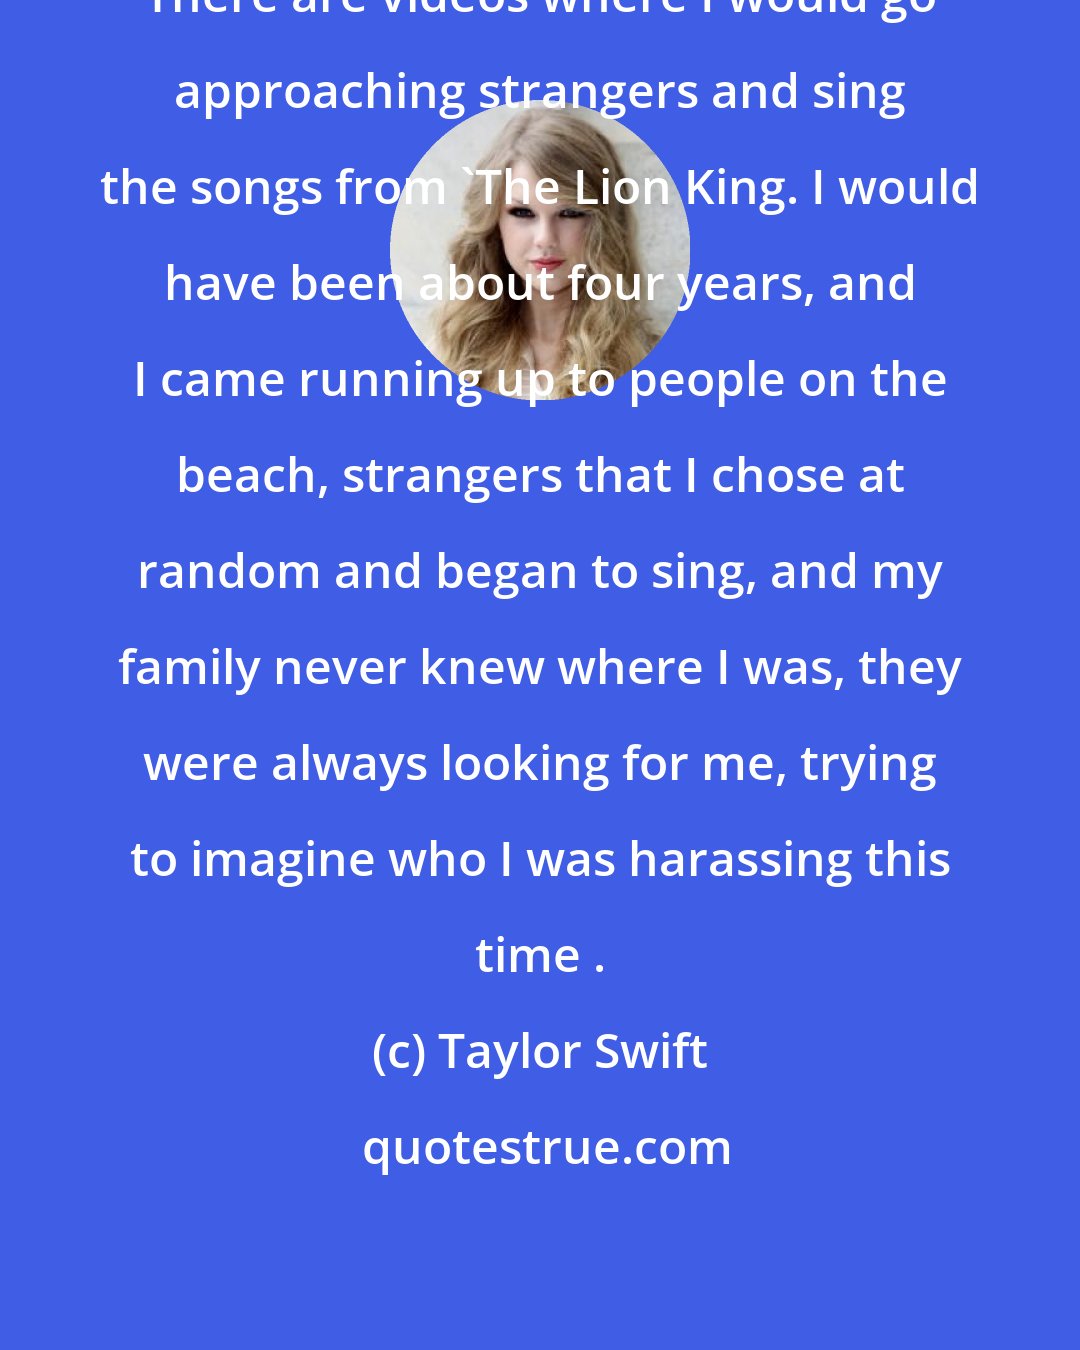 Taylor Swift: There are videos where I would go approaching strangers and sing the songs from 'The Lion King. I would have been about four years, and I came running up to people on the beach, strangers that I chose at random and began to sing, and my family never knew where I was, they were always looking for me, trying to imagine who I was harassing this time .